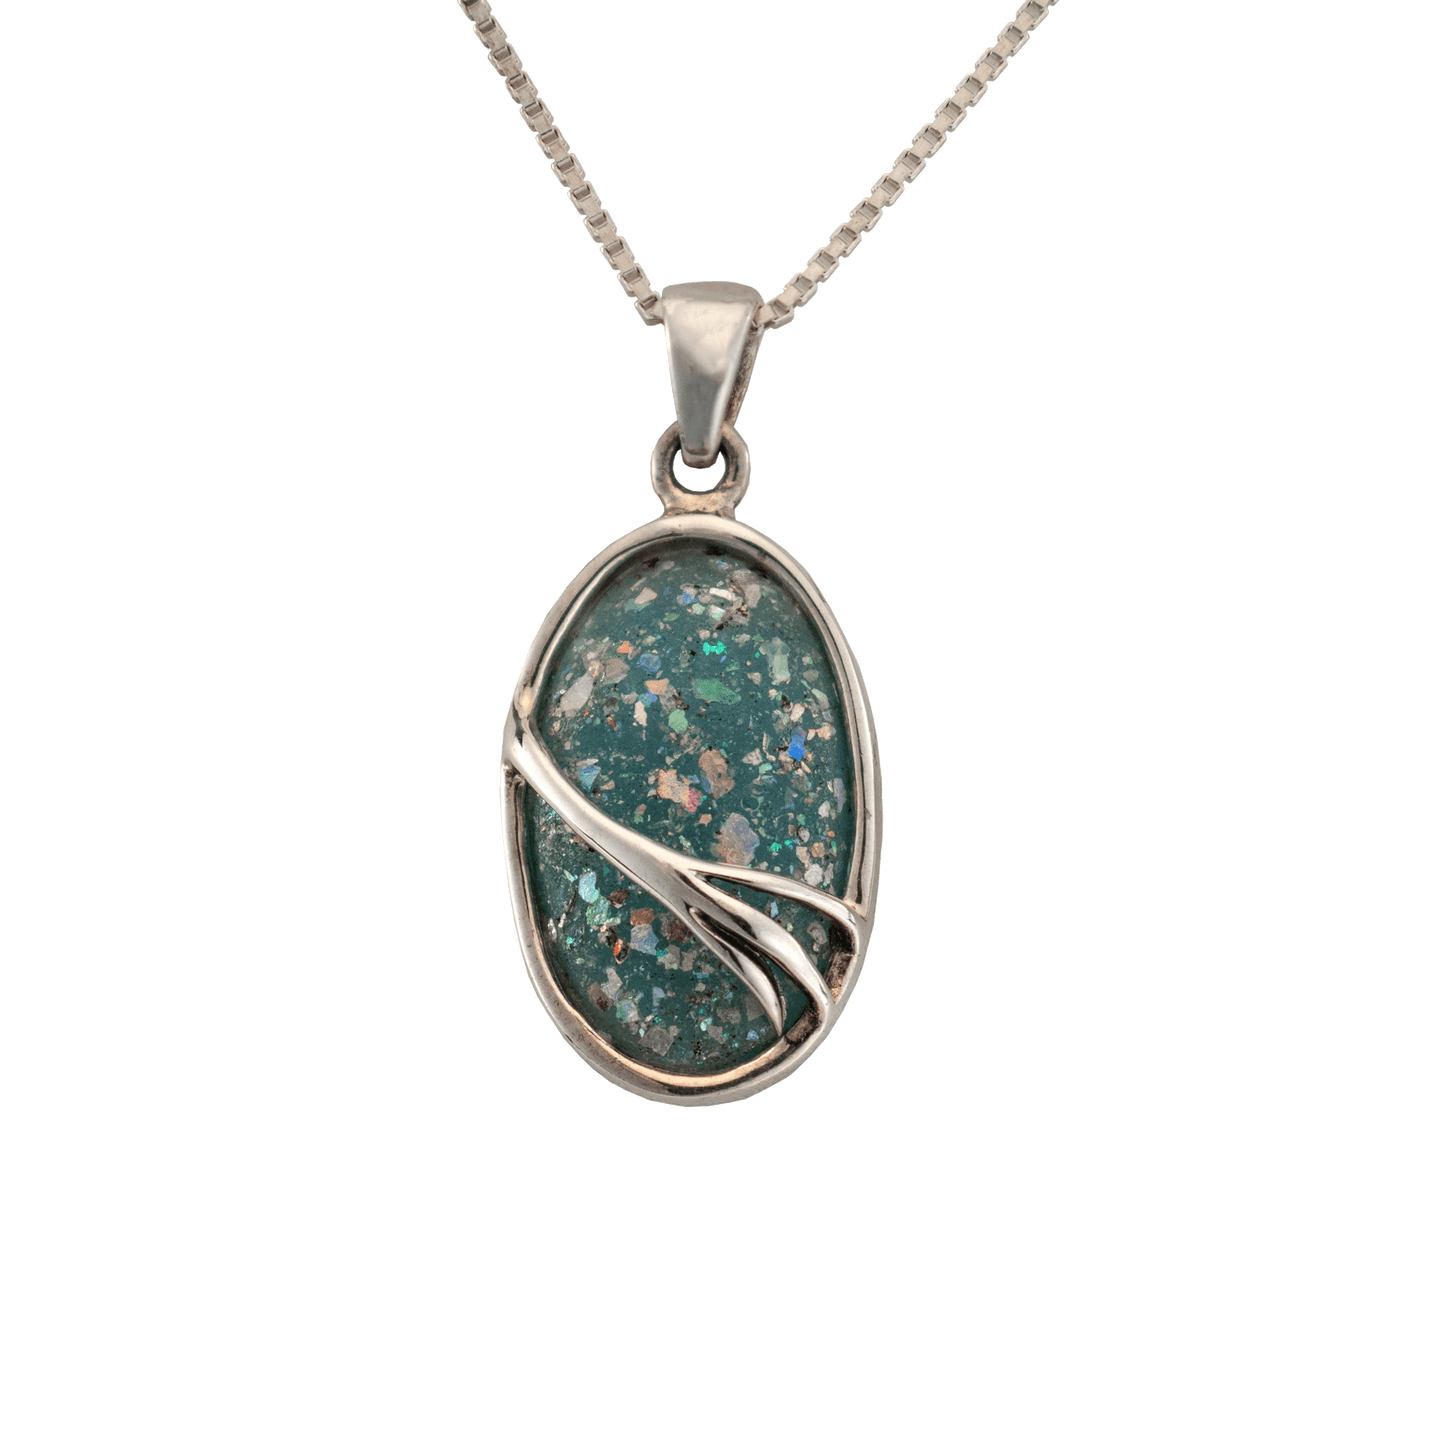 Oval Roman Glass pendant surrounded by decorative silver and silver chain